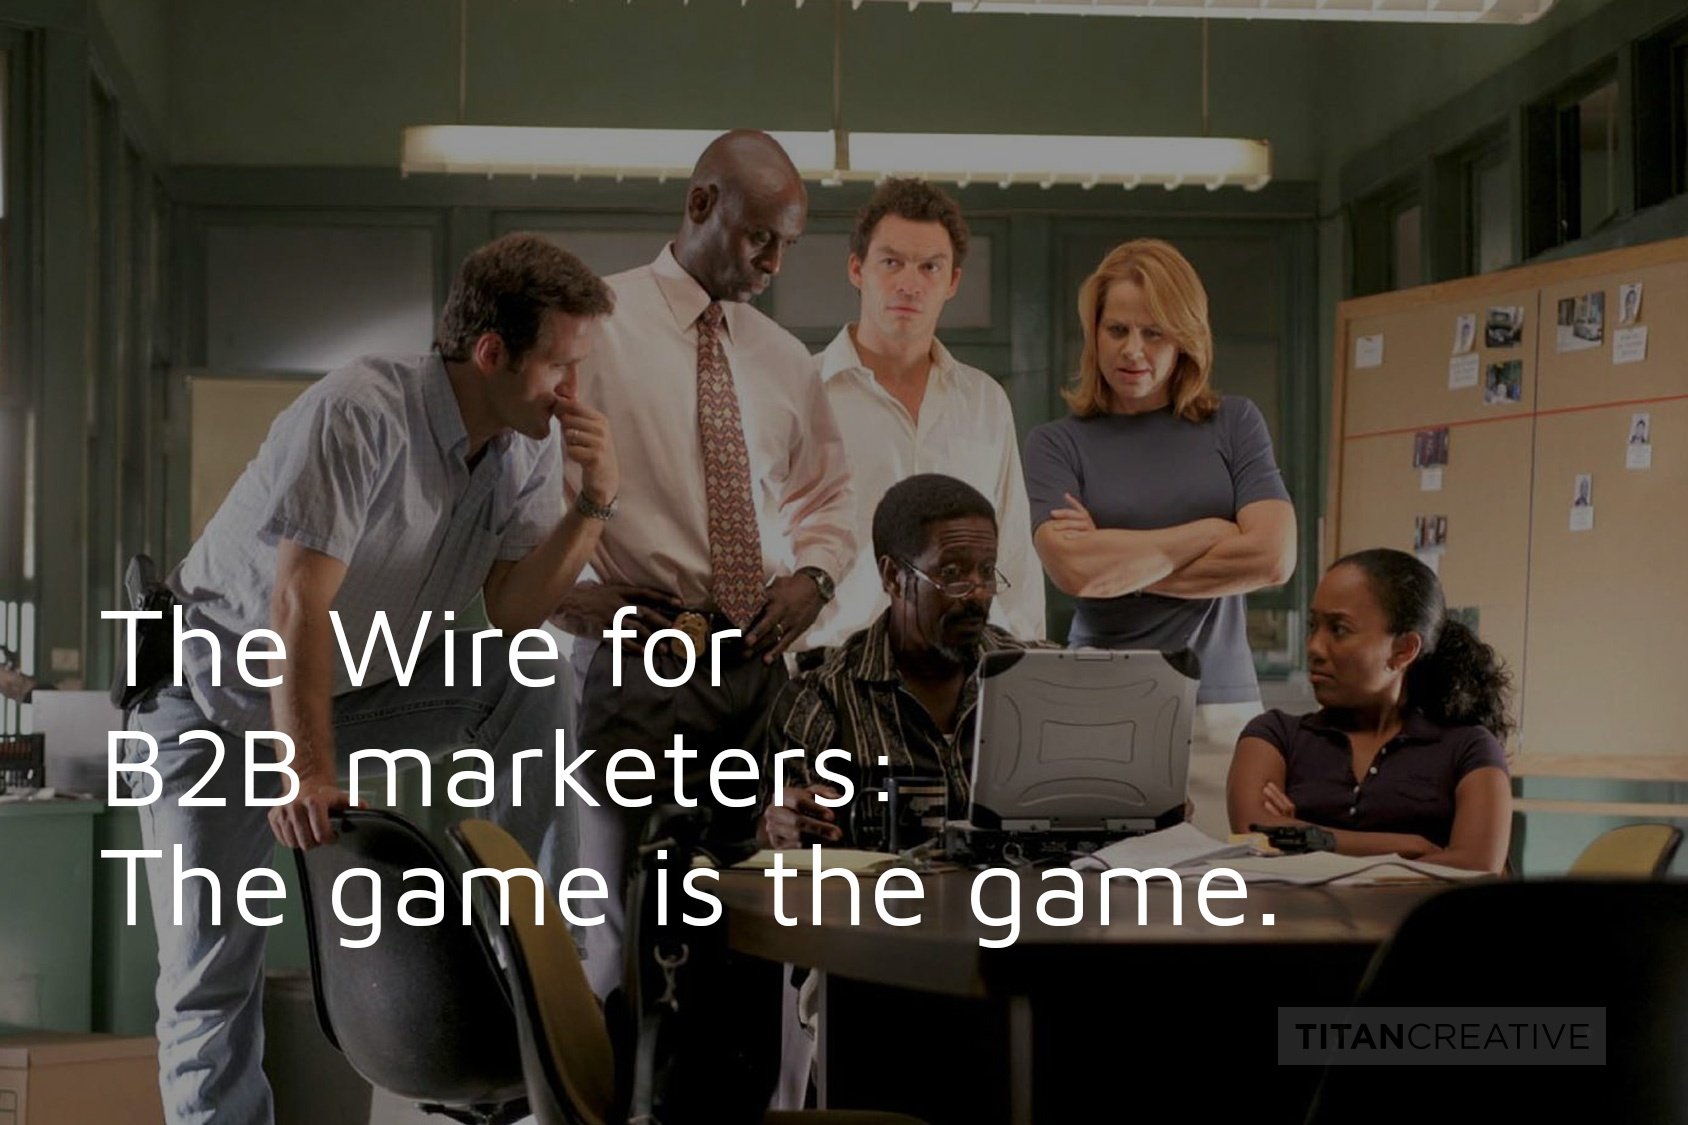 The Wire for B2B marketers: The game is the game.